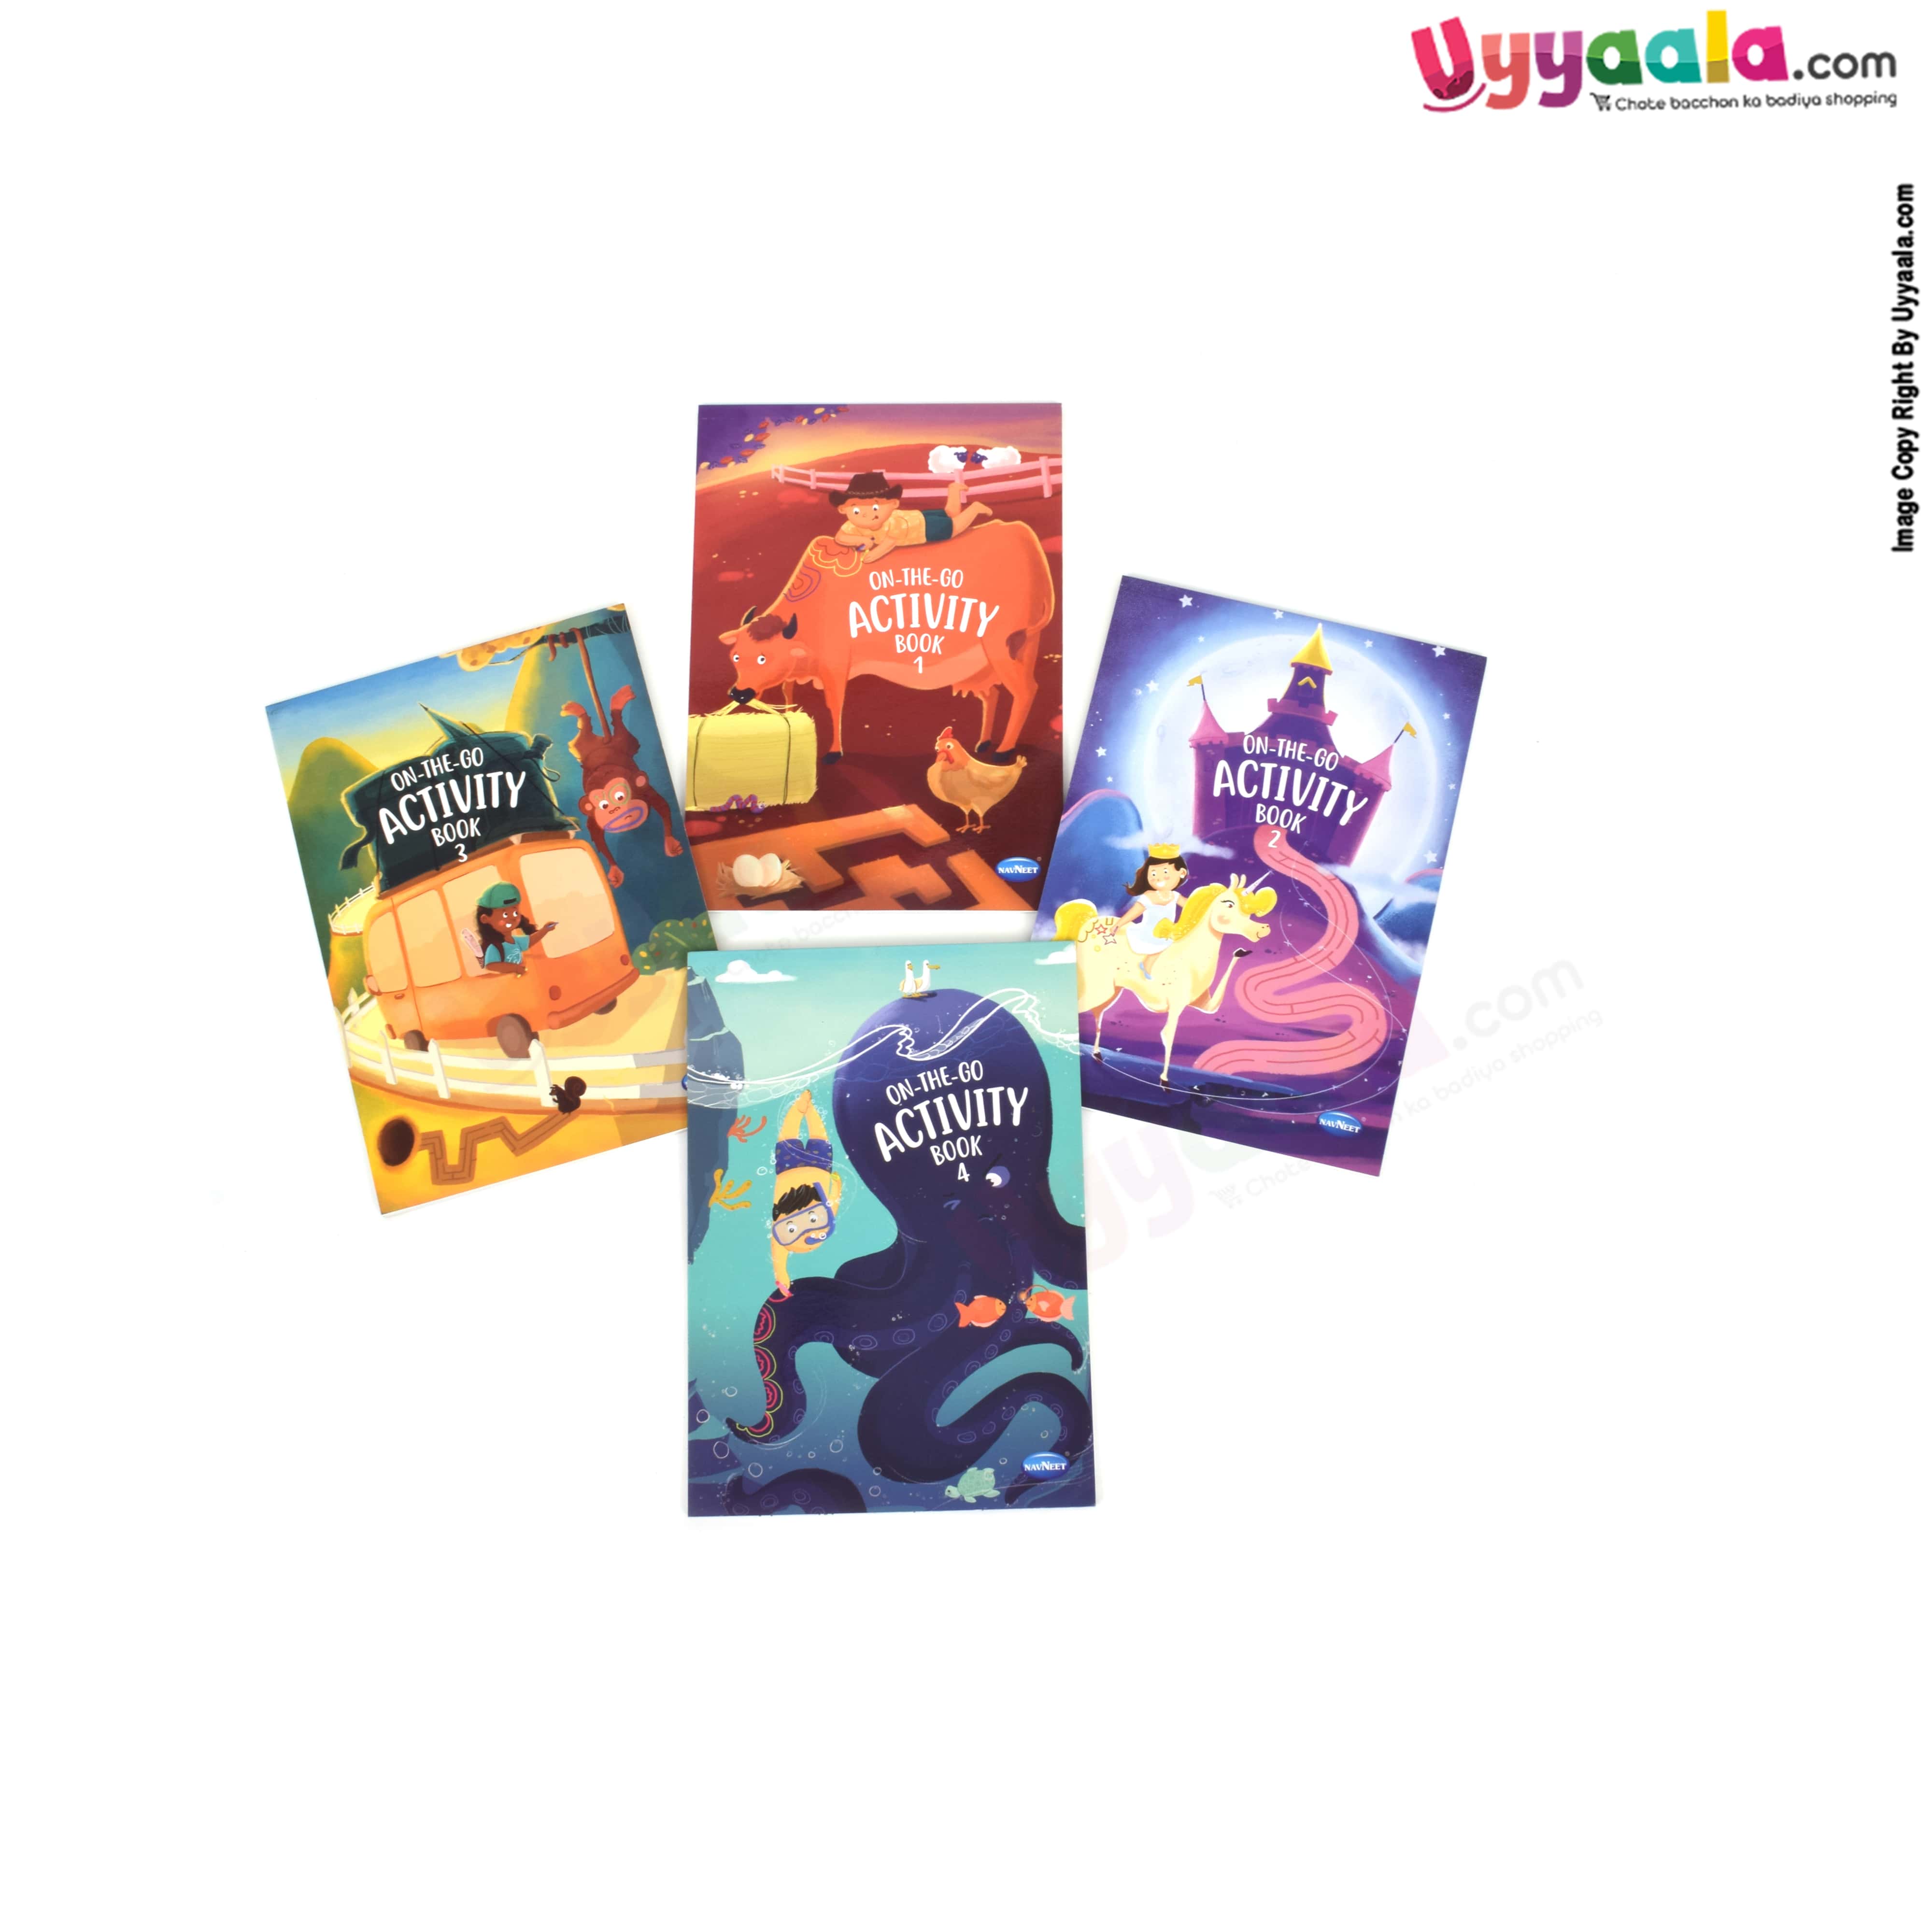 NAVNEET on - the - go activity book, Pack of 4 - 4 volumes